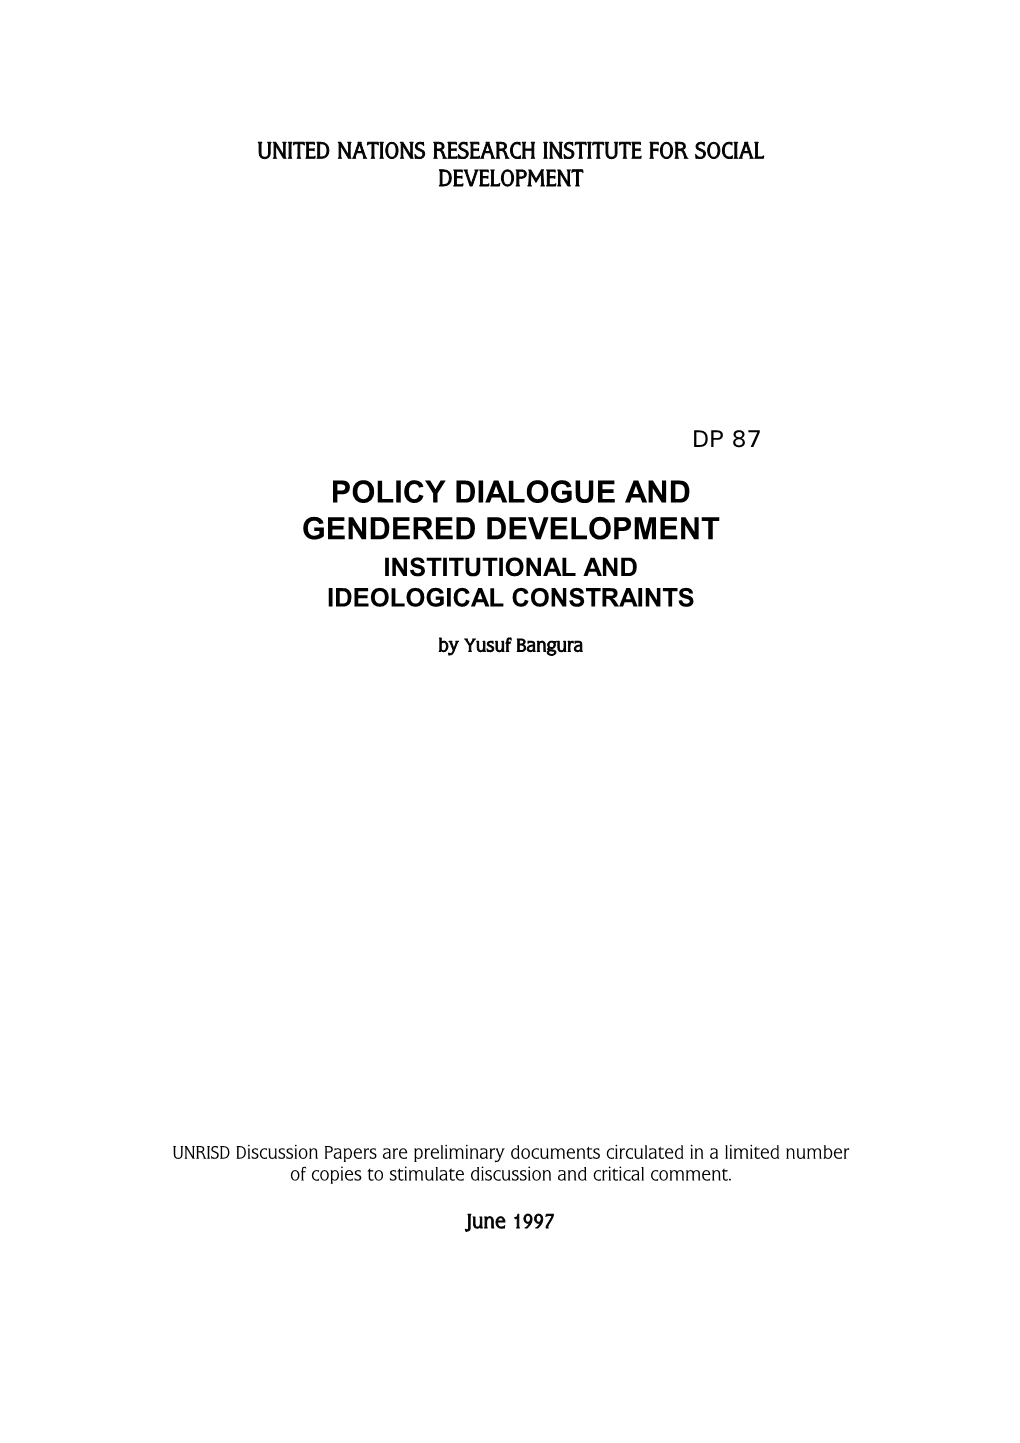 Policy Dialogue and Gendered Development Institutional and Ideological Constraints